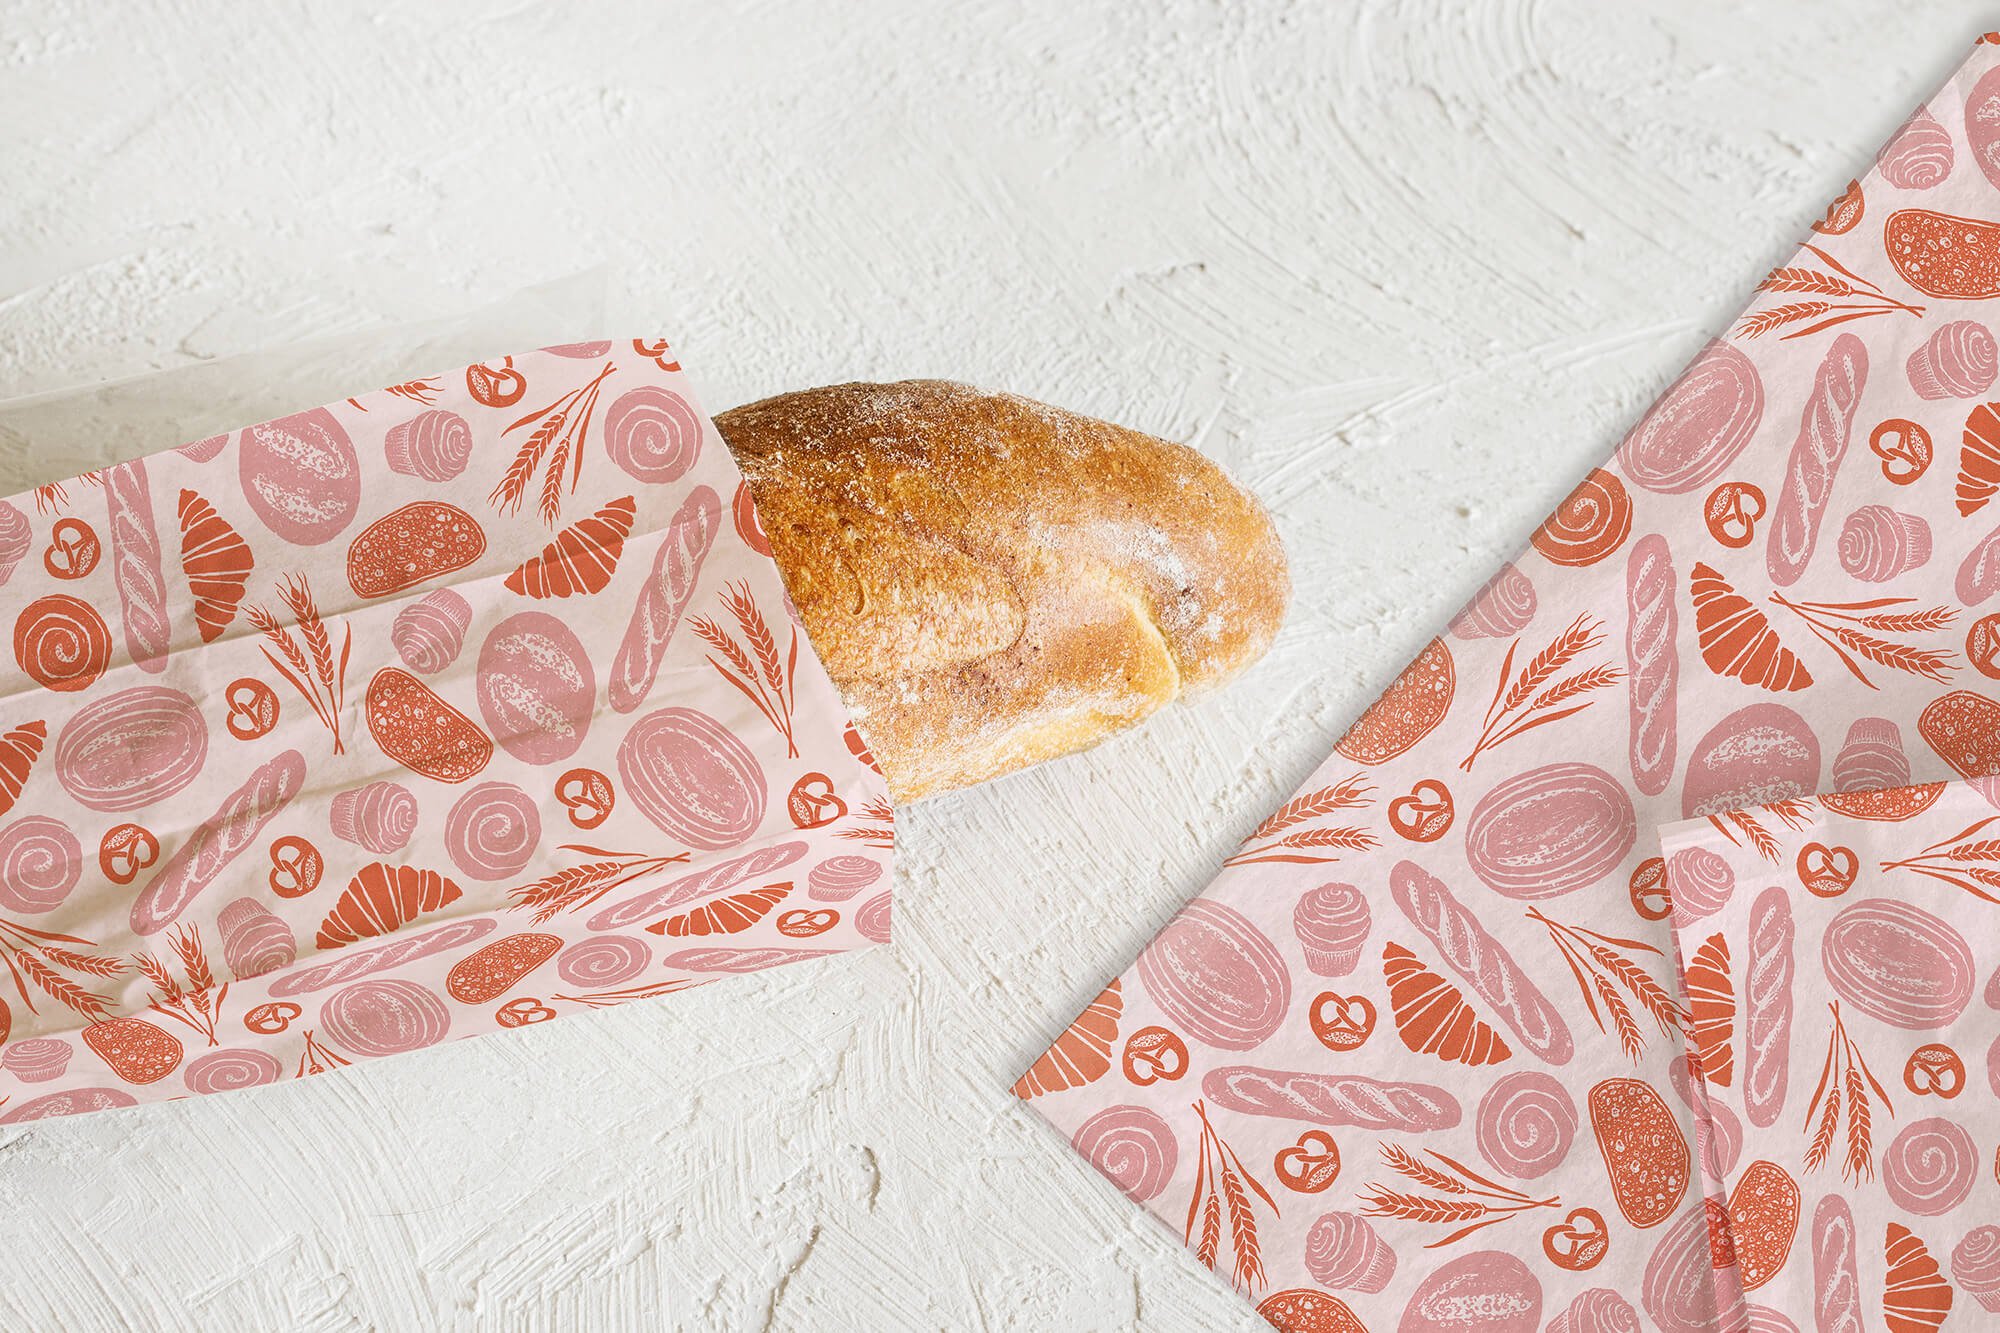  Pattern illustration for packaging for a bakery in pinks and orange with a hand drawn and textured feel. The pattern is on tissue paper to wrap around bread. 